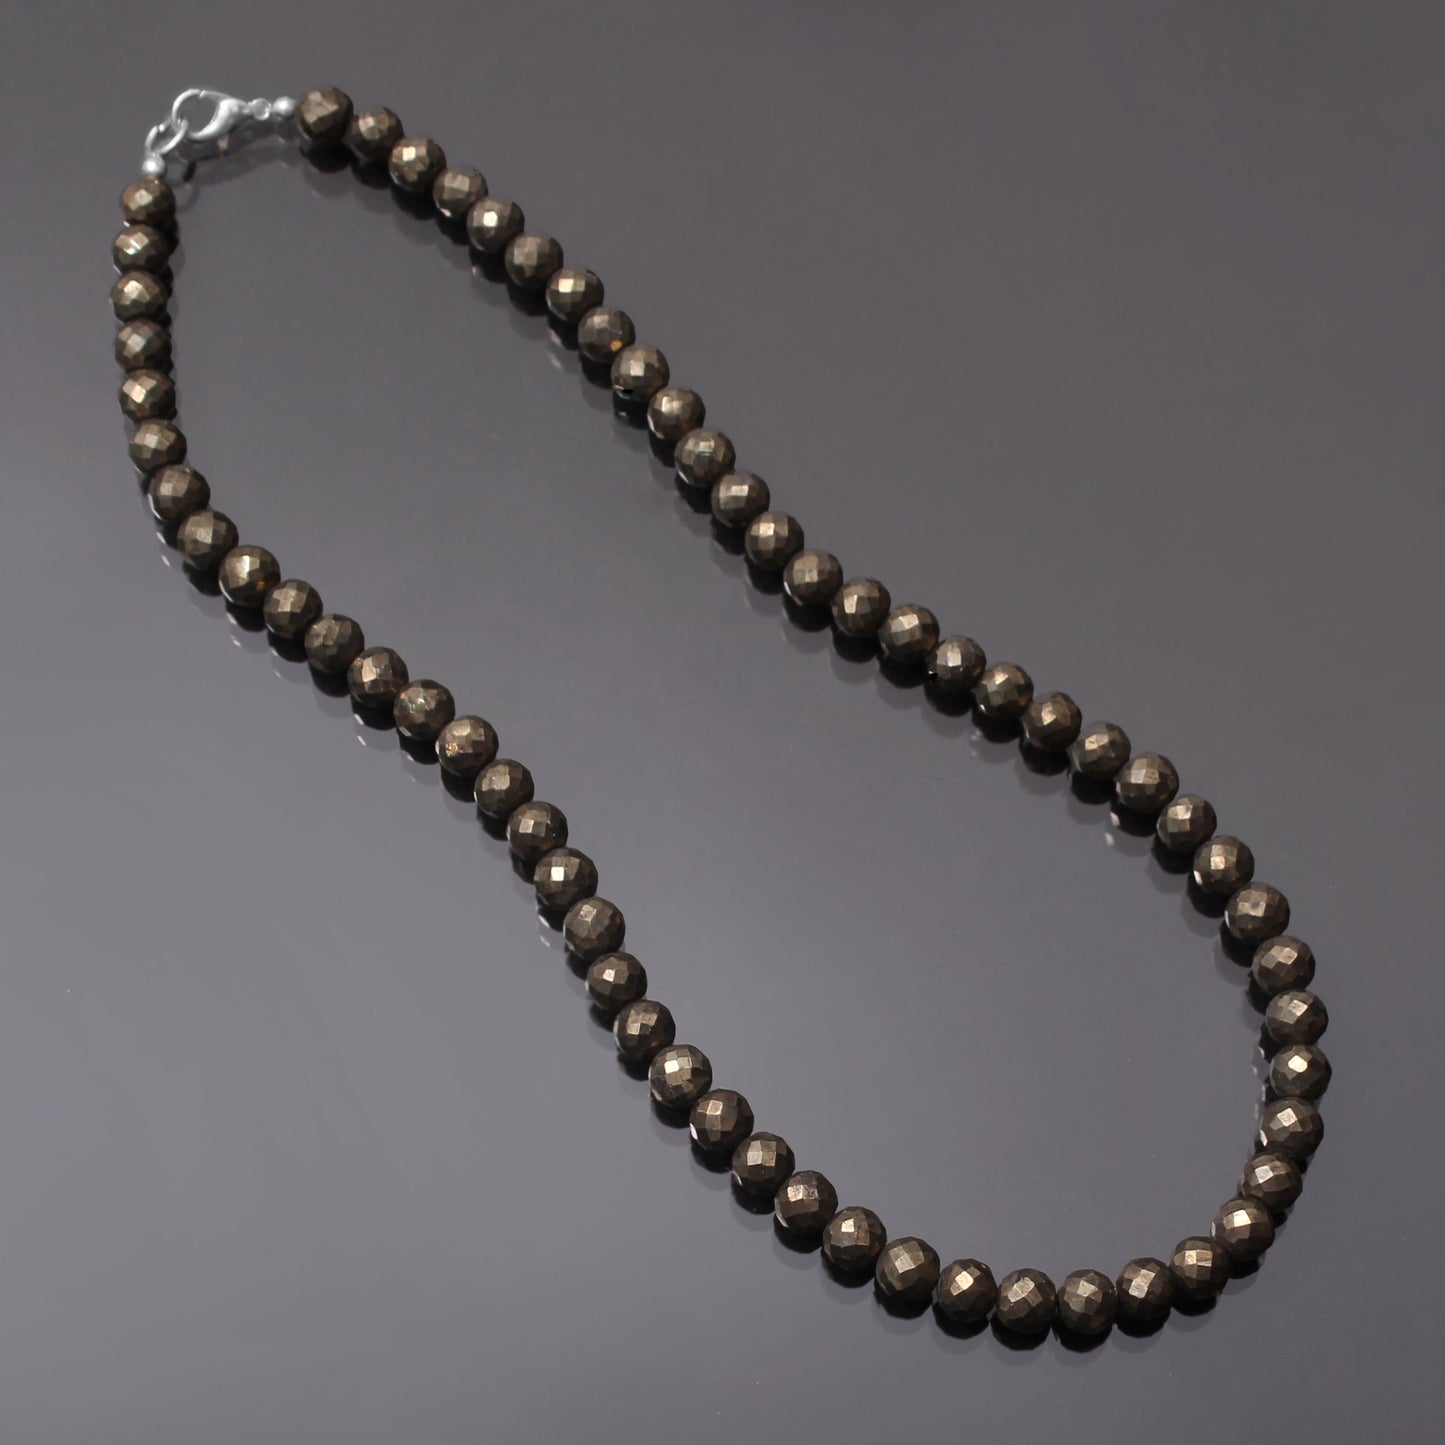 Faceted Pyrite Gemstone Beads Silver Necklace GemsRush